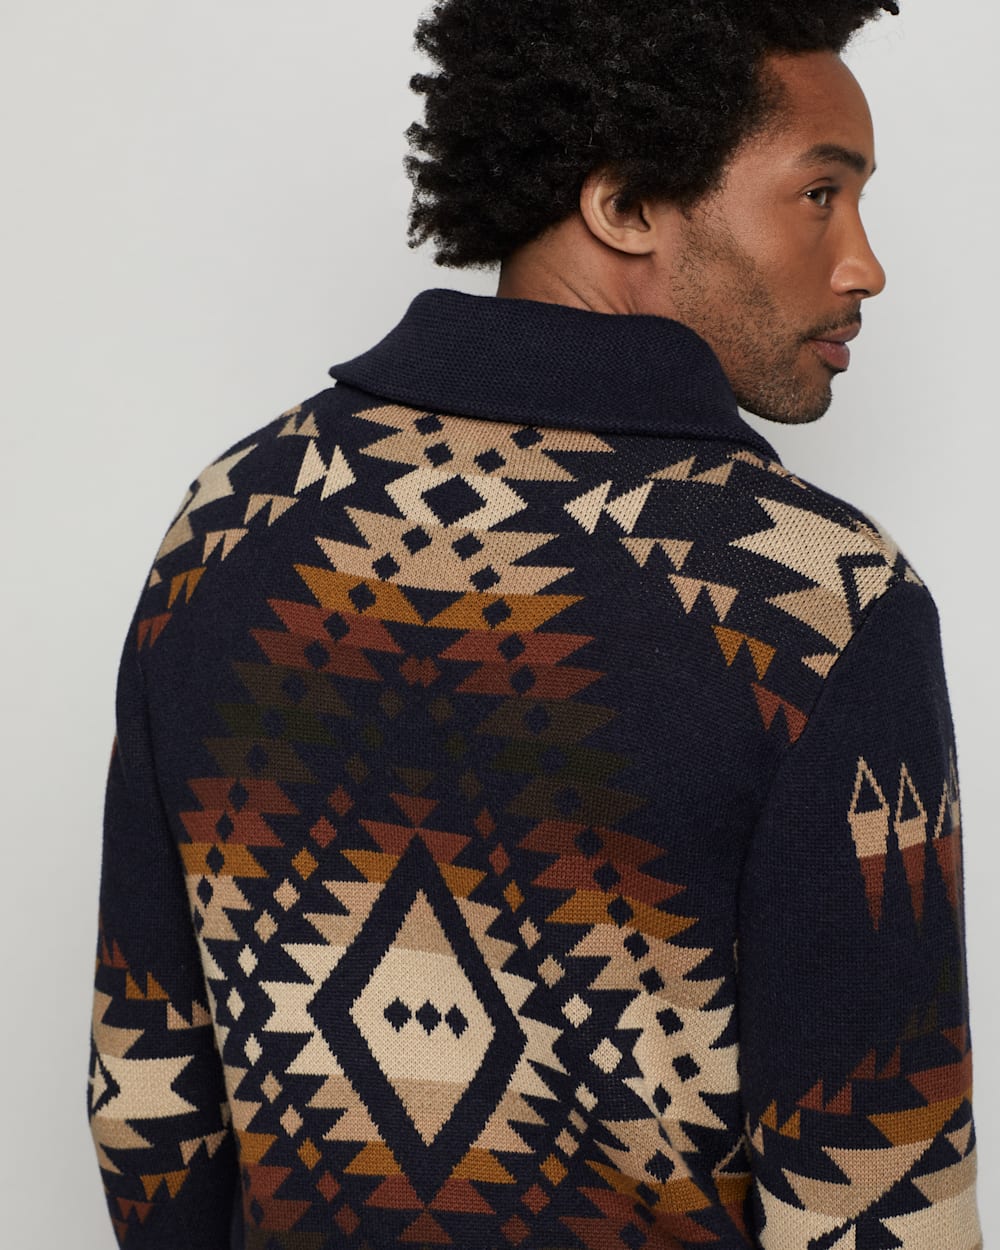 ALTERNATE VIEW OF MEN'S MISSION TRAILS COTTON CARDIGAN IN NAVY MULTI image number 4